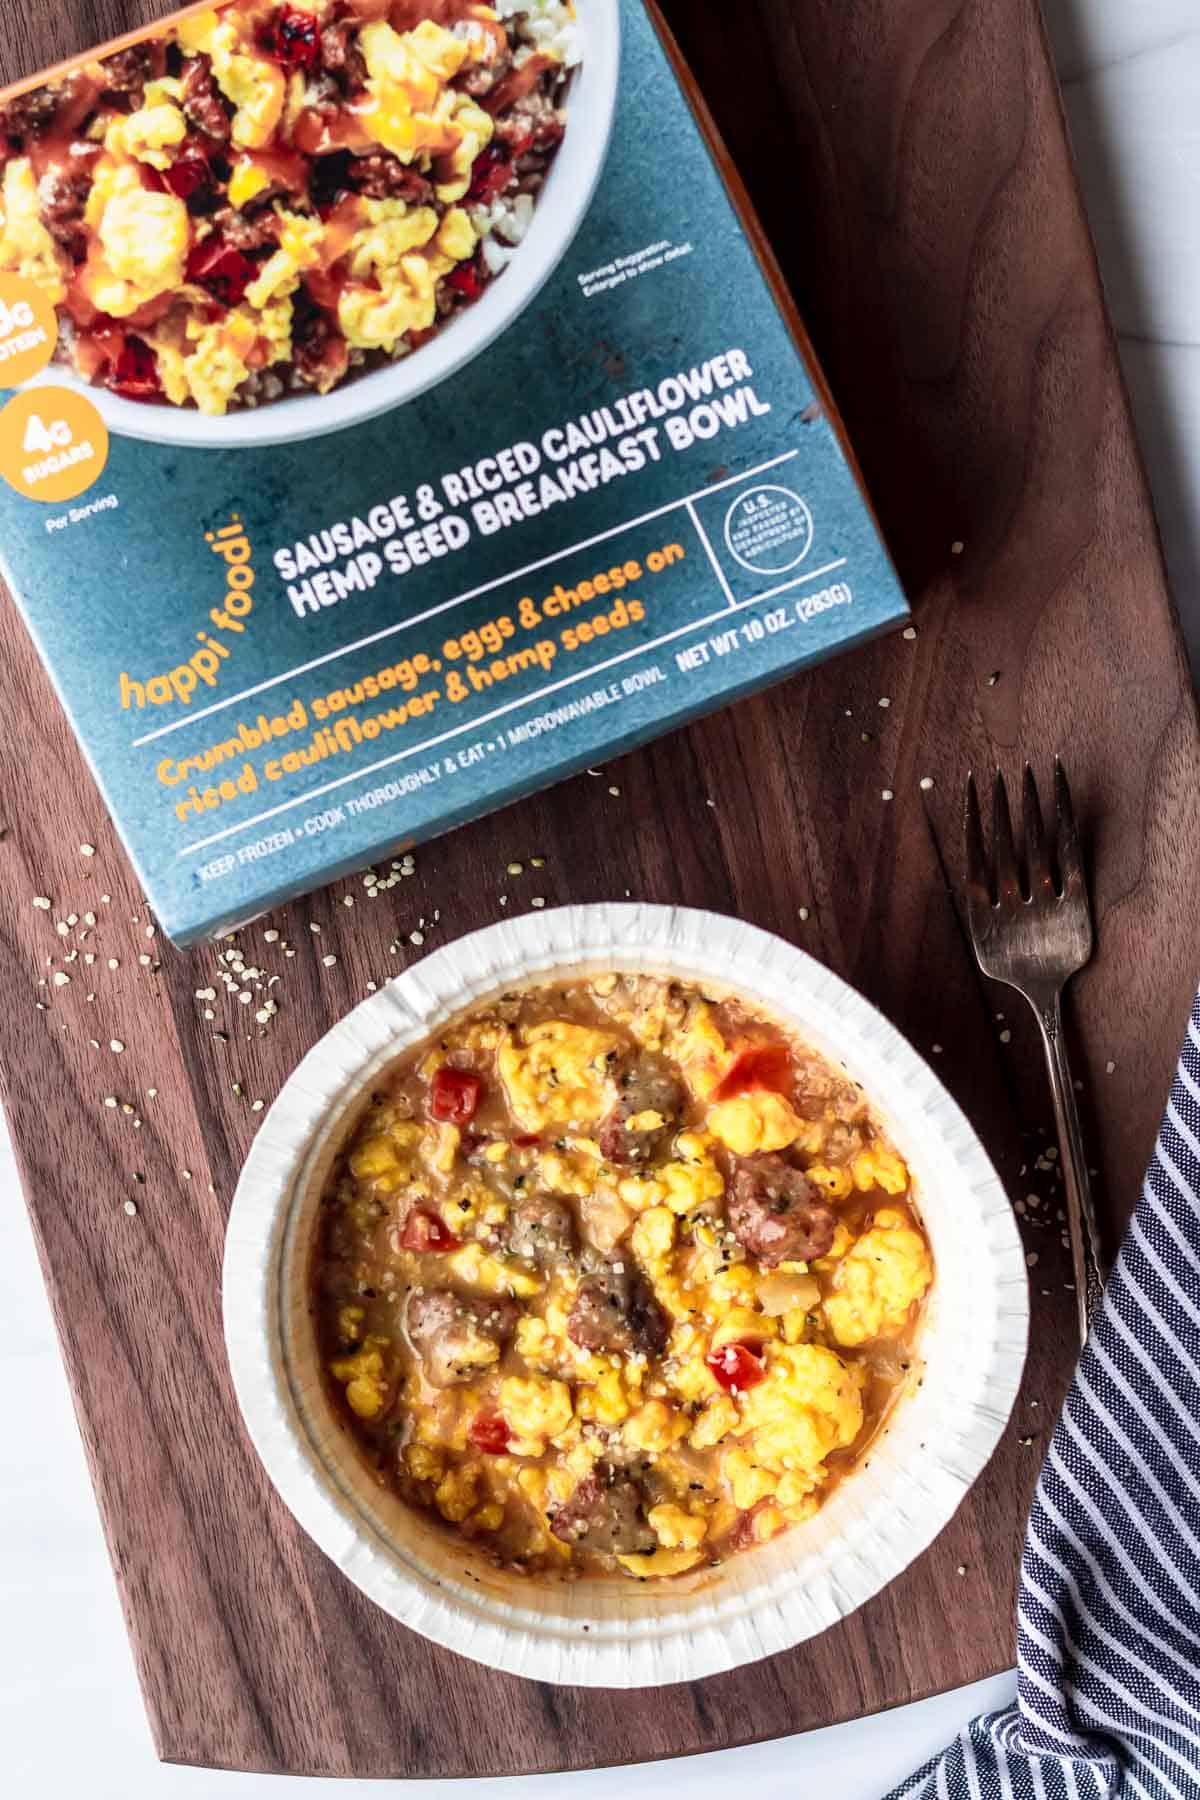 Sausage & Rice Cauliflower Hemp Seed Breakfast Bowl packaging and cooked meal on a wood background with a napkin and fork